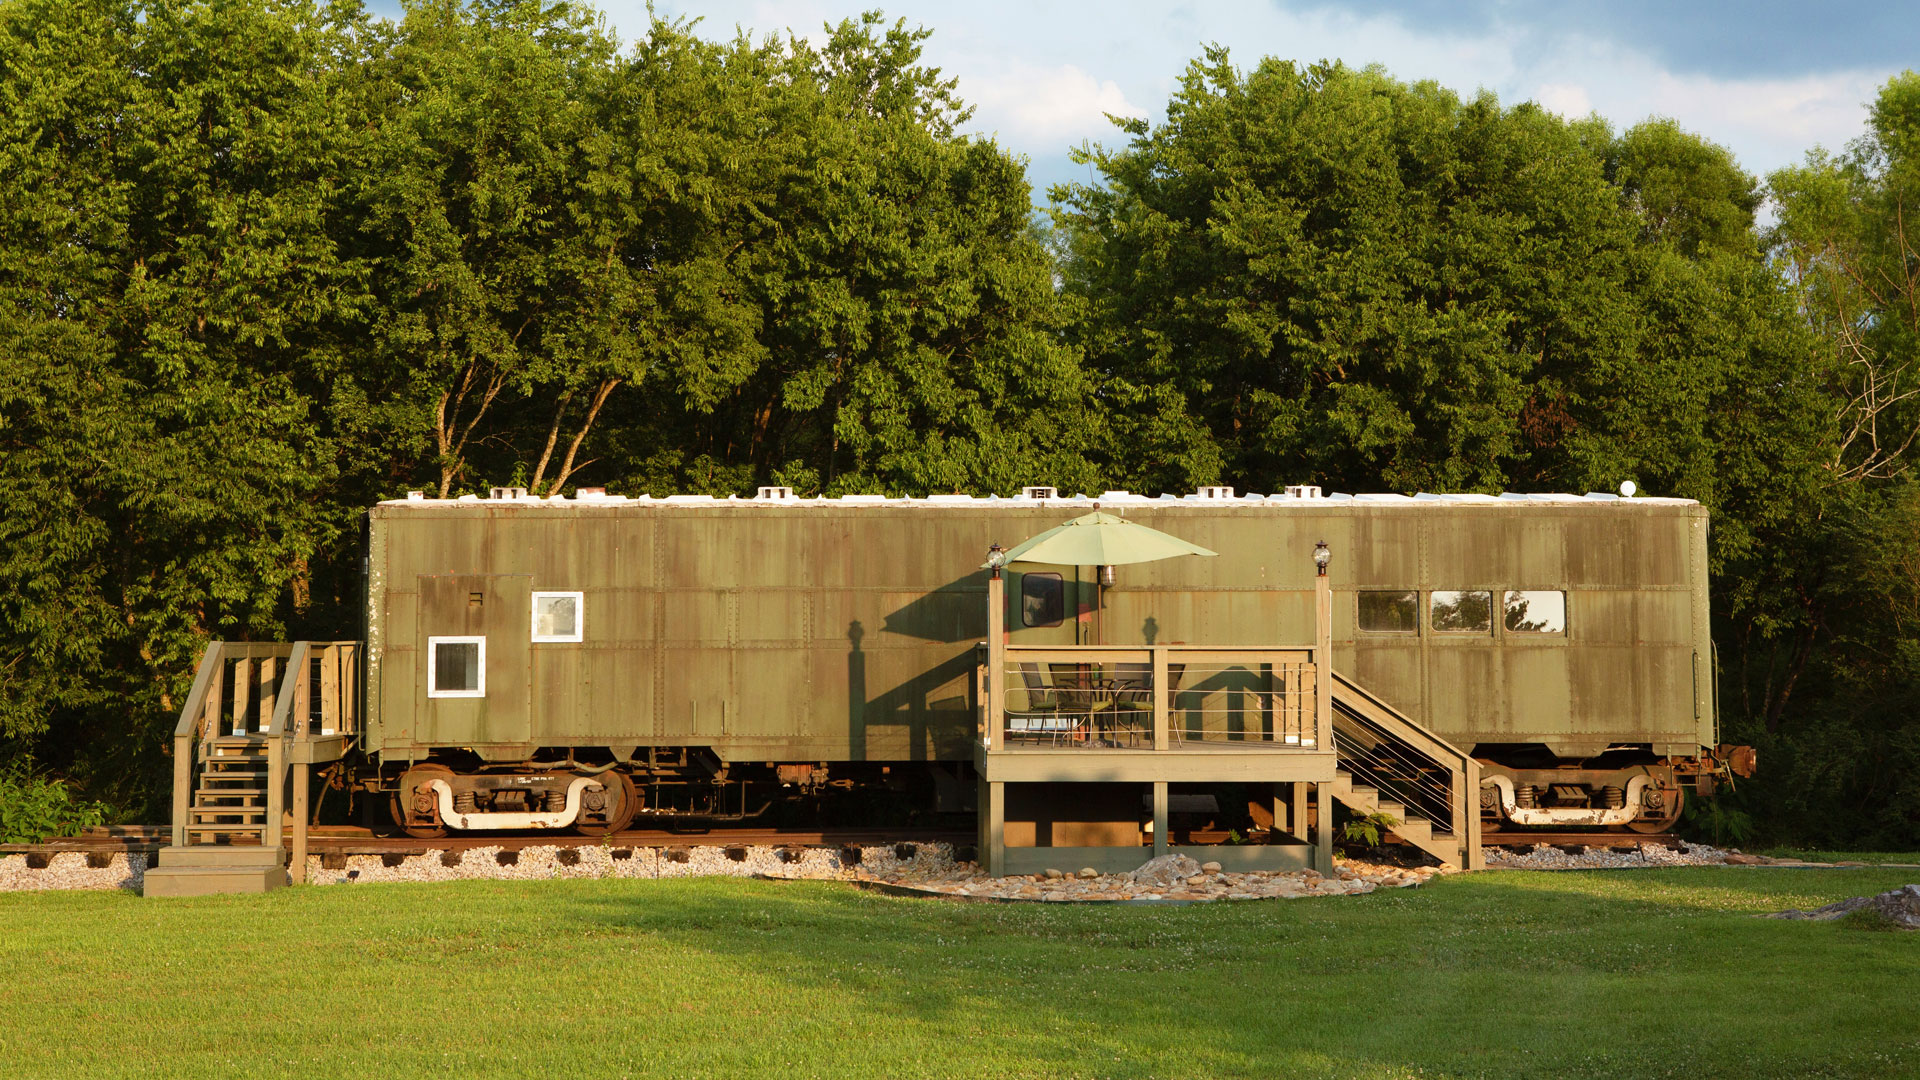 Dude, Someone Stole My Train Car (And Converted It To An AirBnB)!